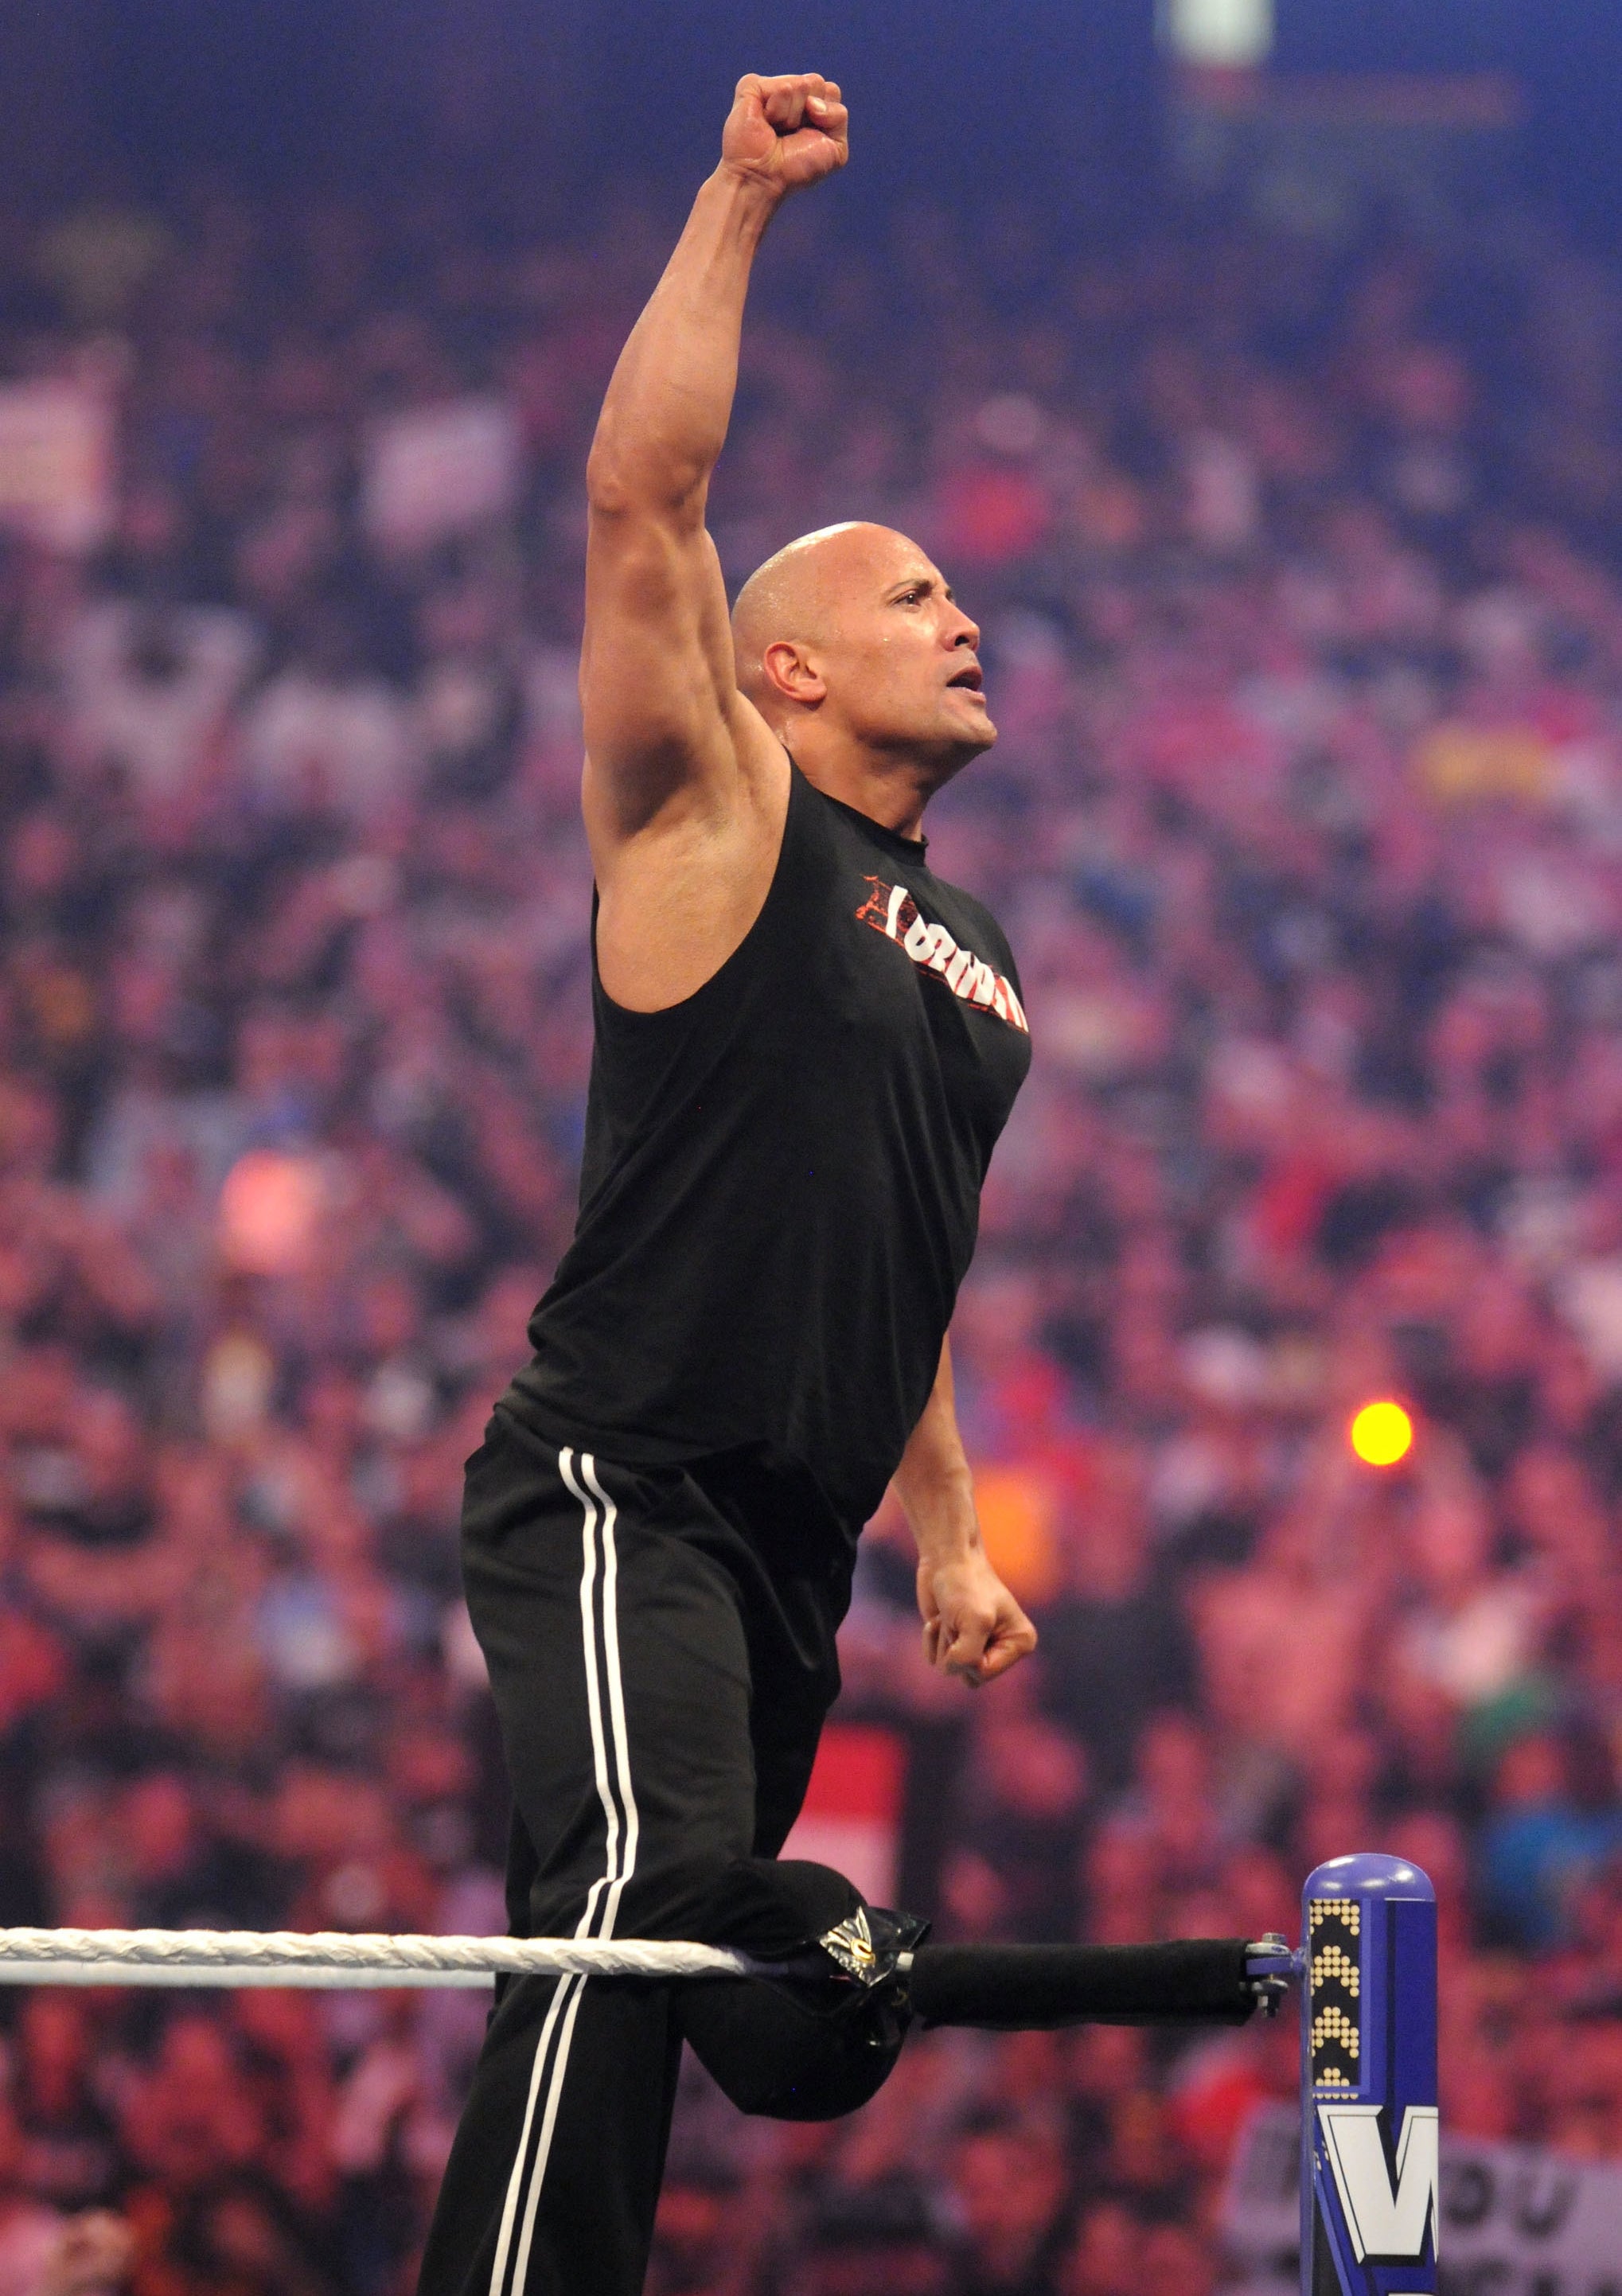 Dwayne &quot;The Rock&quot; Johnson at the WWE in 2011